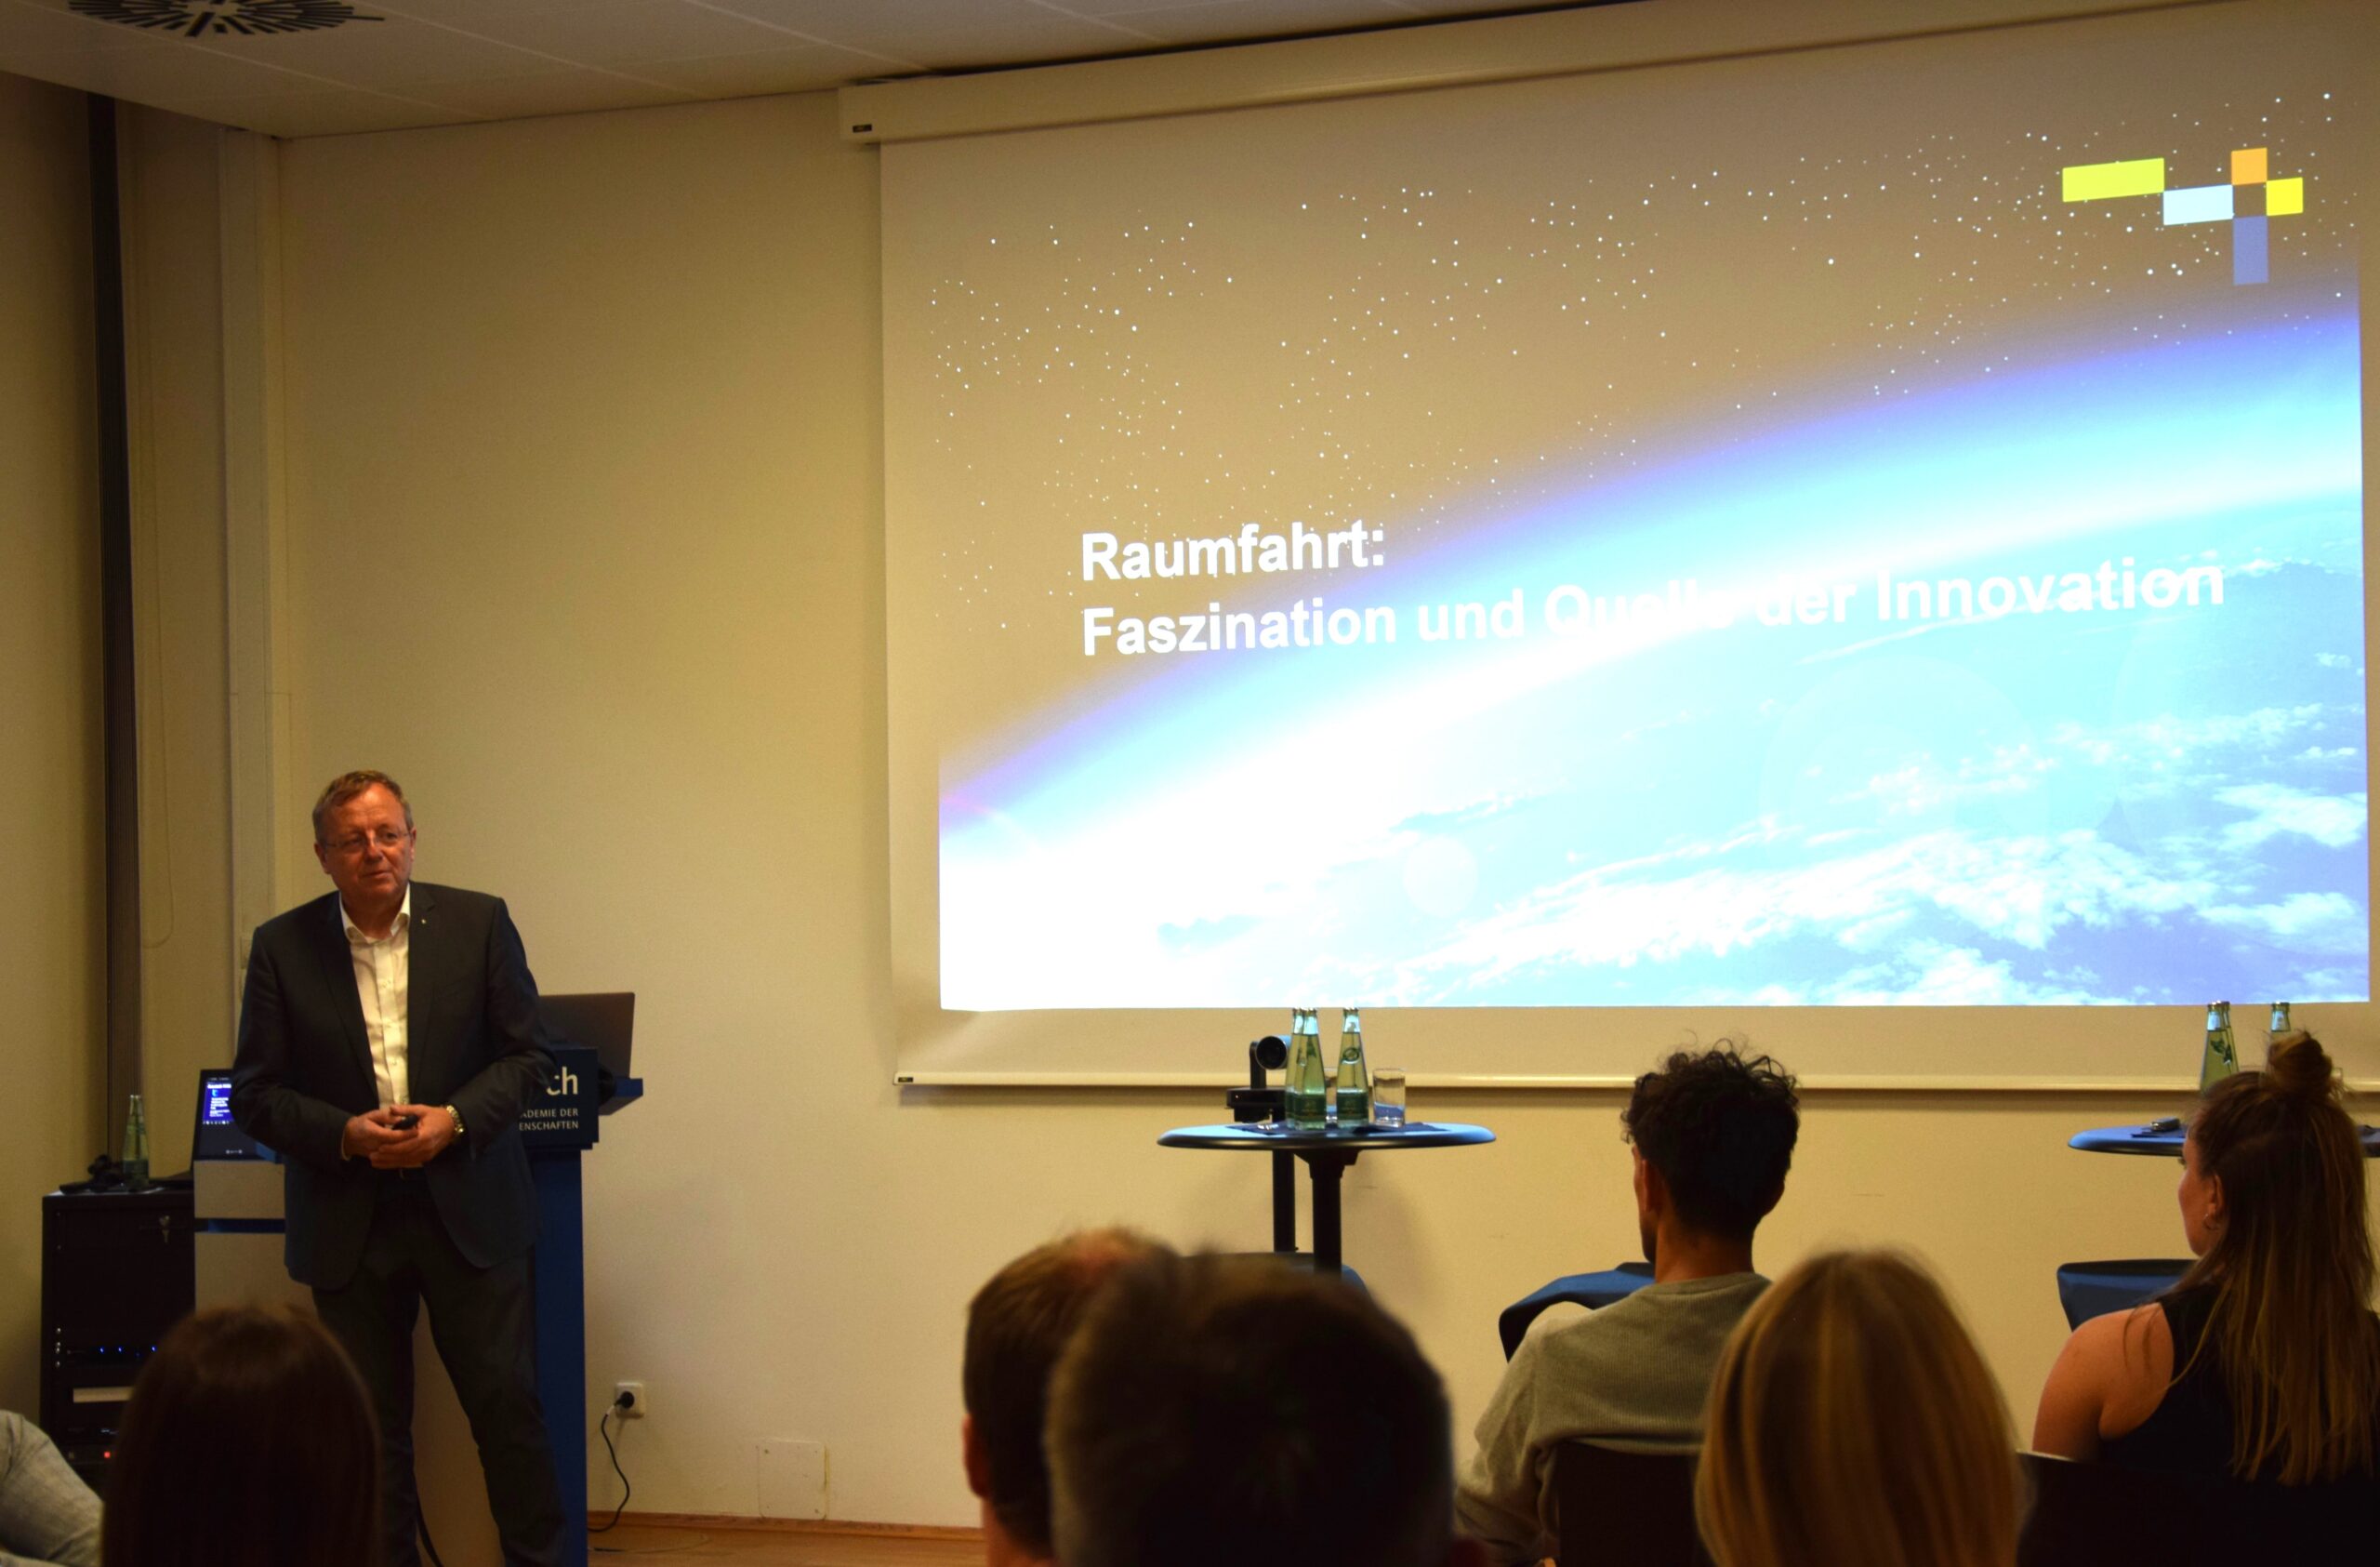 acatech President Jan Wörner opened acatech am Dienstag in Karolinenplatz square with his speech entitled “Space: A source of wonder and innovation”.